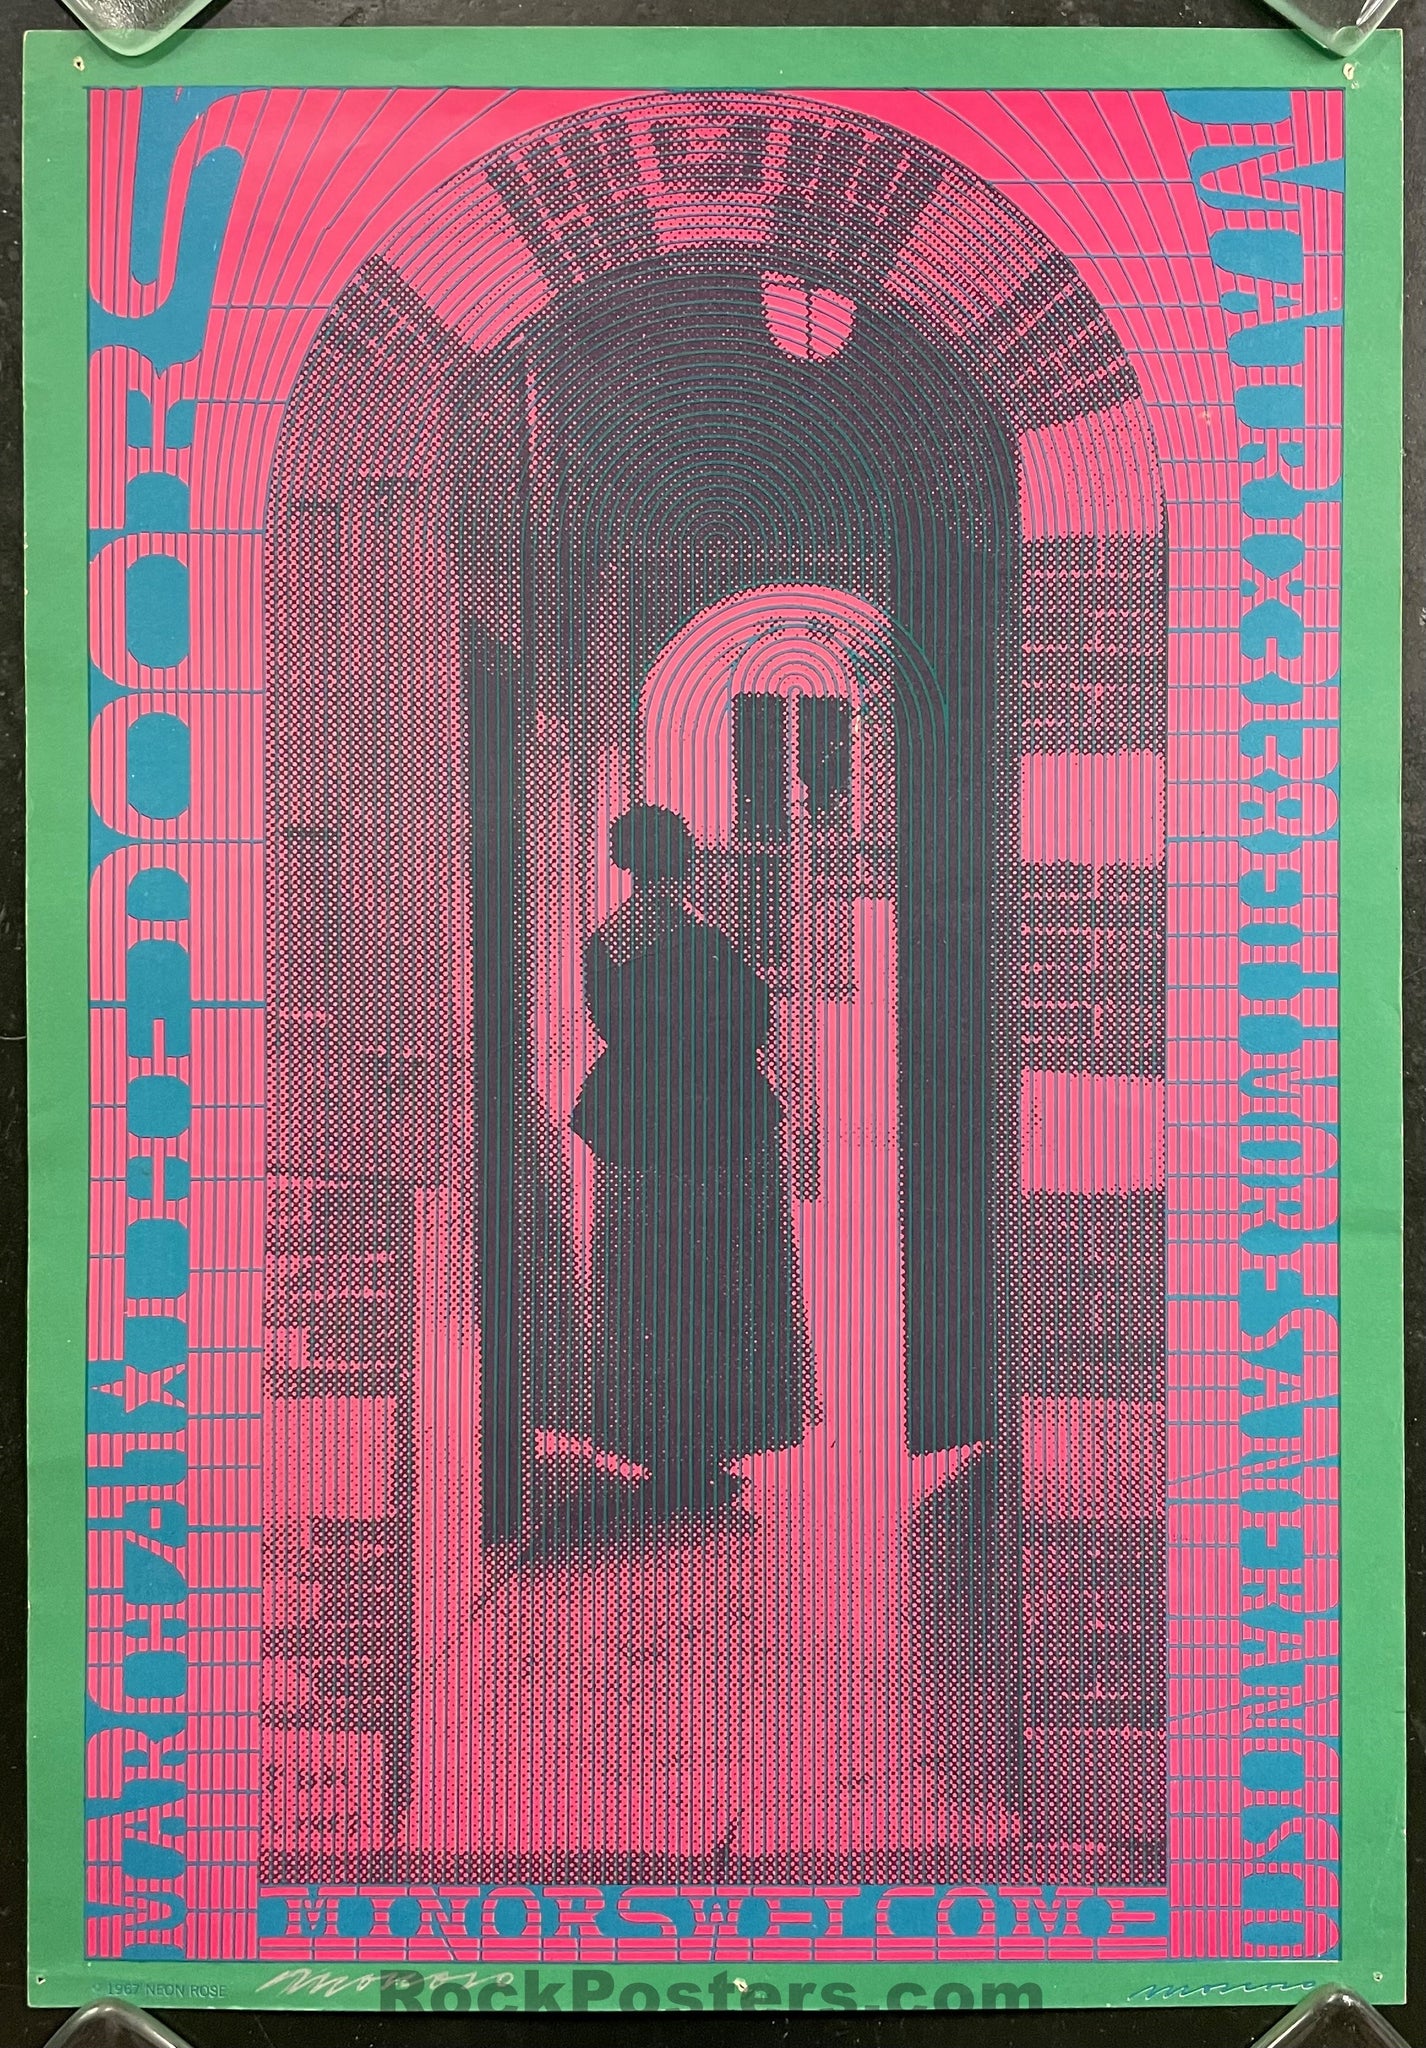 AUCTION - Neon Rose 10 - The Doors - Moscoso Signed - 1967 Poster - Matrix - Excellent